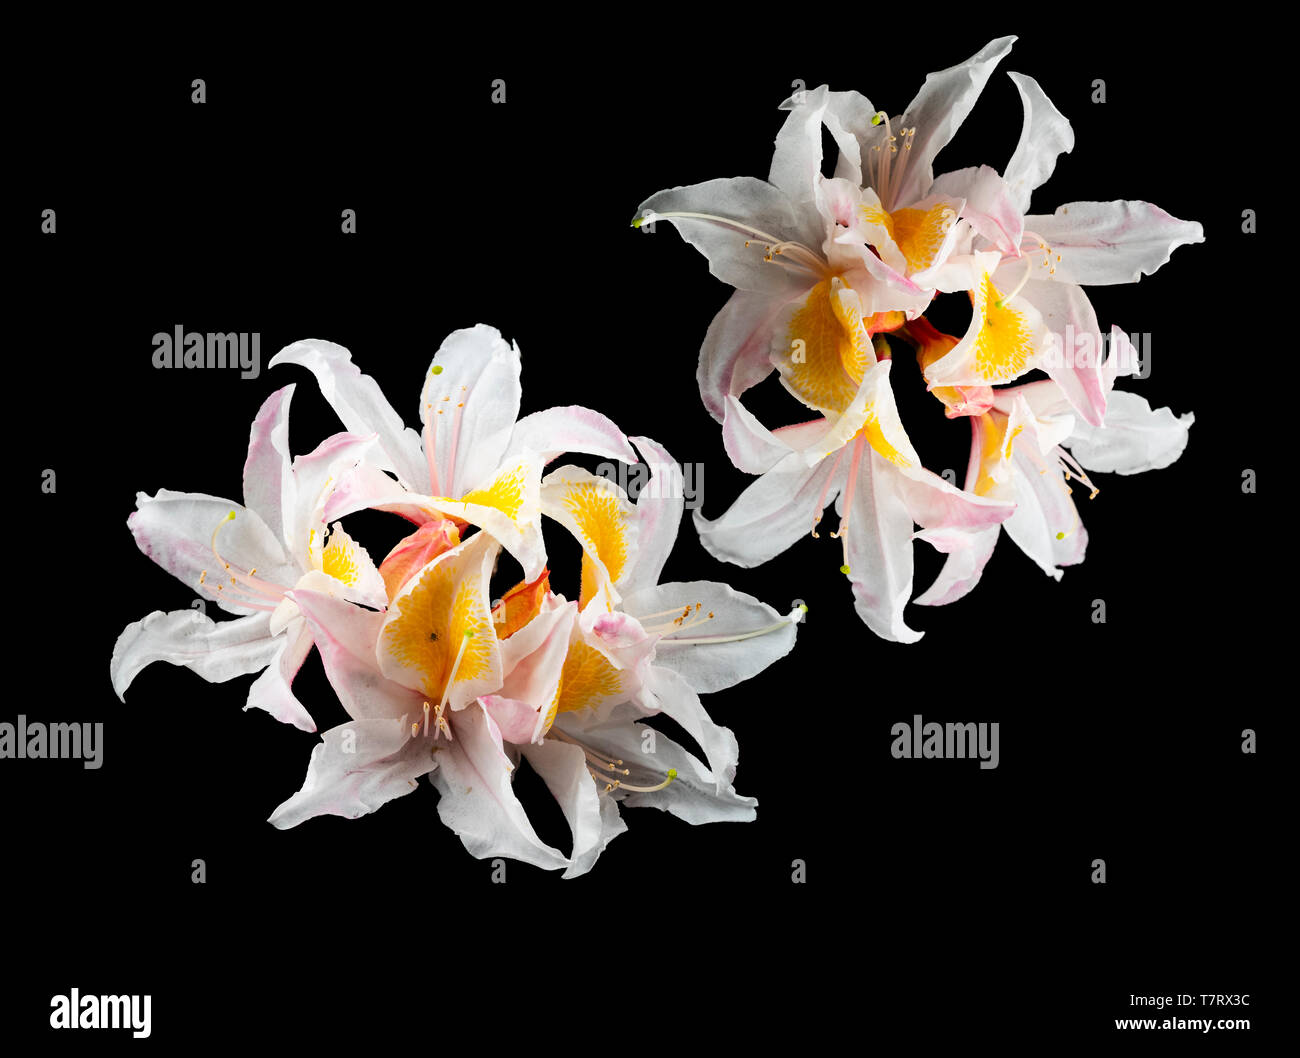 Flower trusss of the scented, spring blooming deciduous azalea, Rhododendron 'Exquisite' on a black background Stock Photo